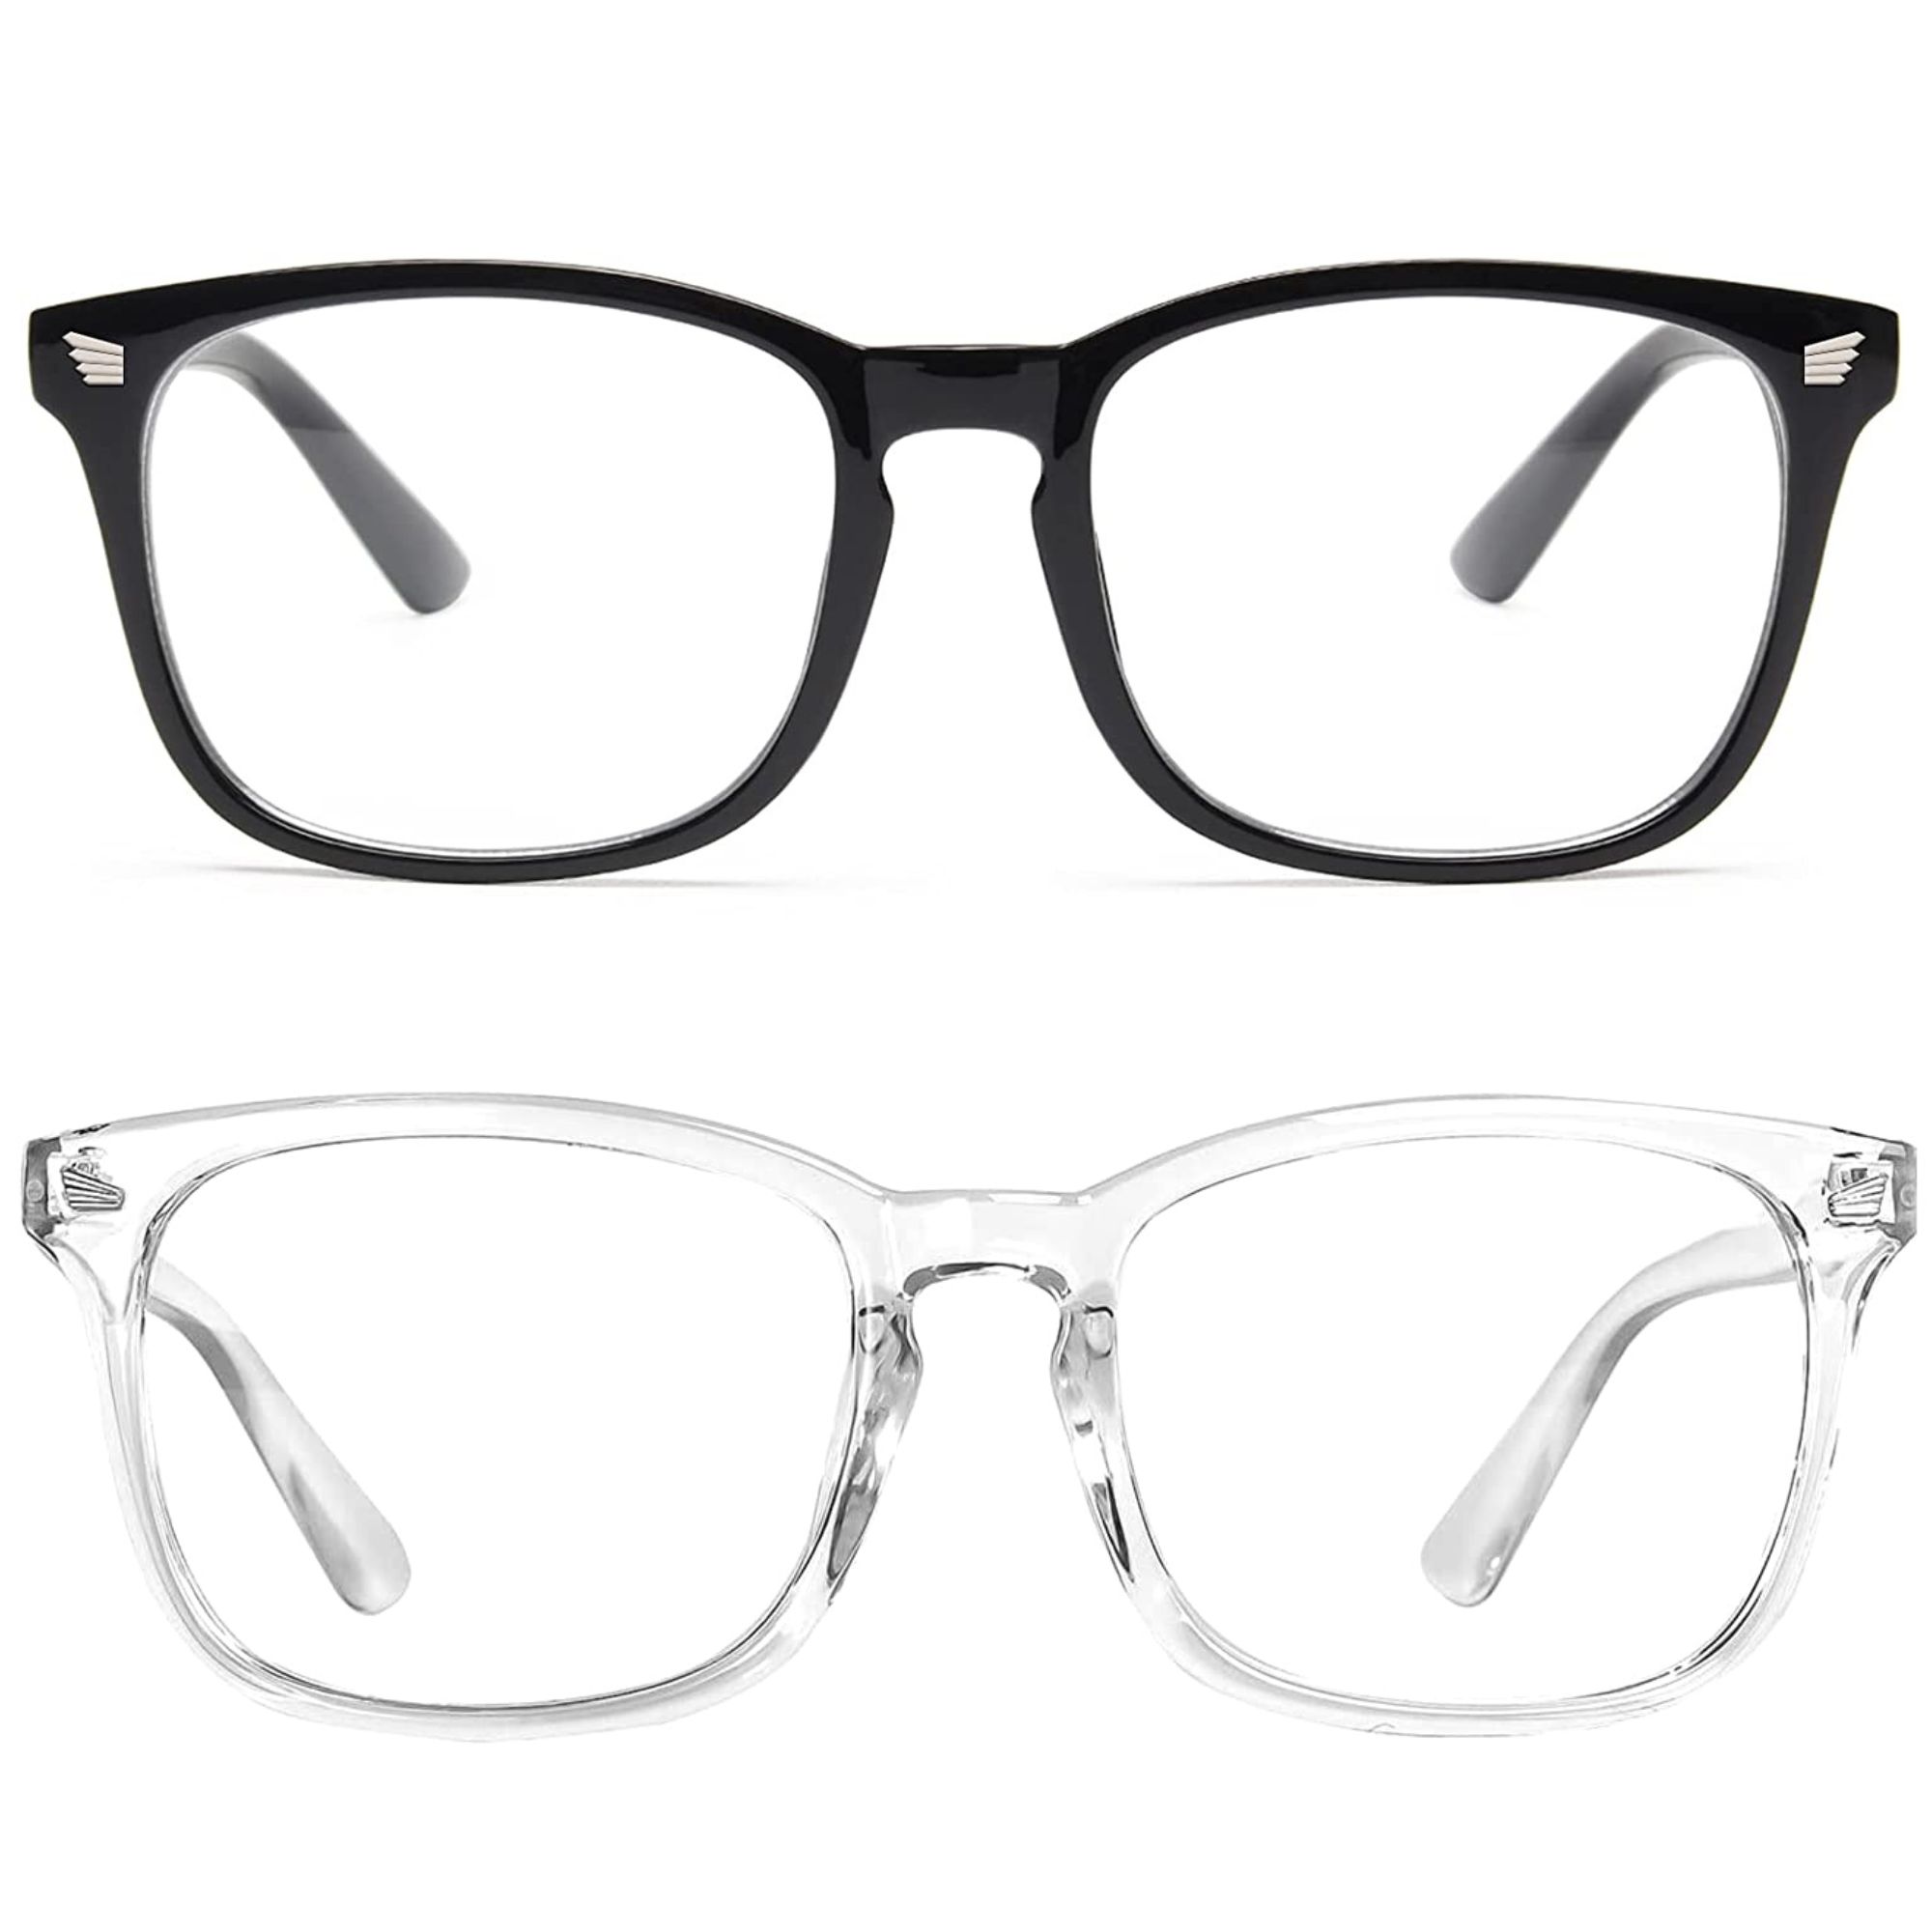 combo computer glasses black and transparent clear